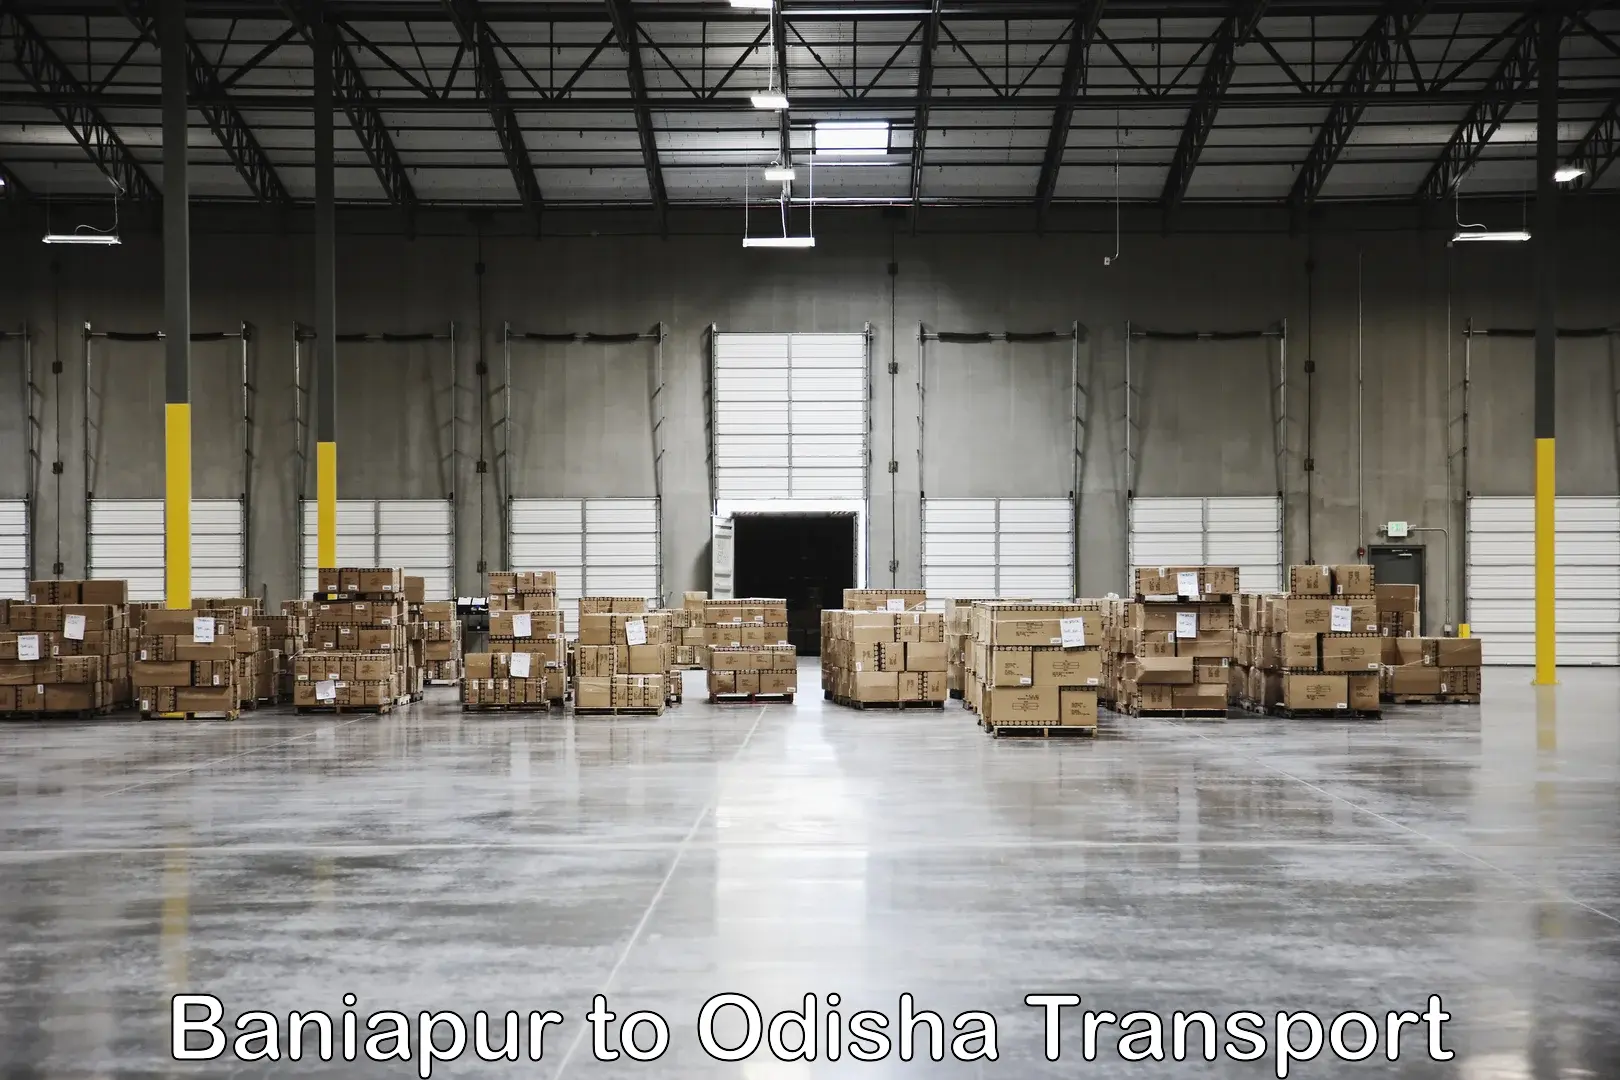 Daily parcel service transport Baniapur to Bargarh